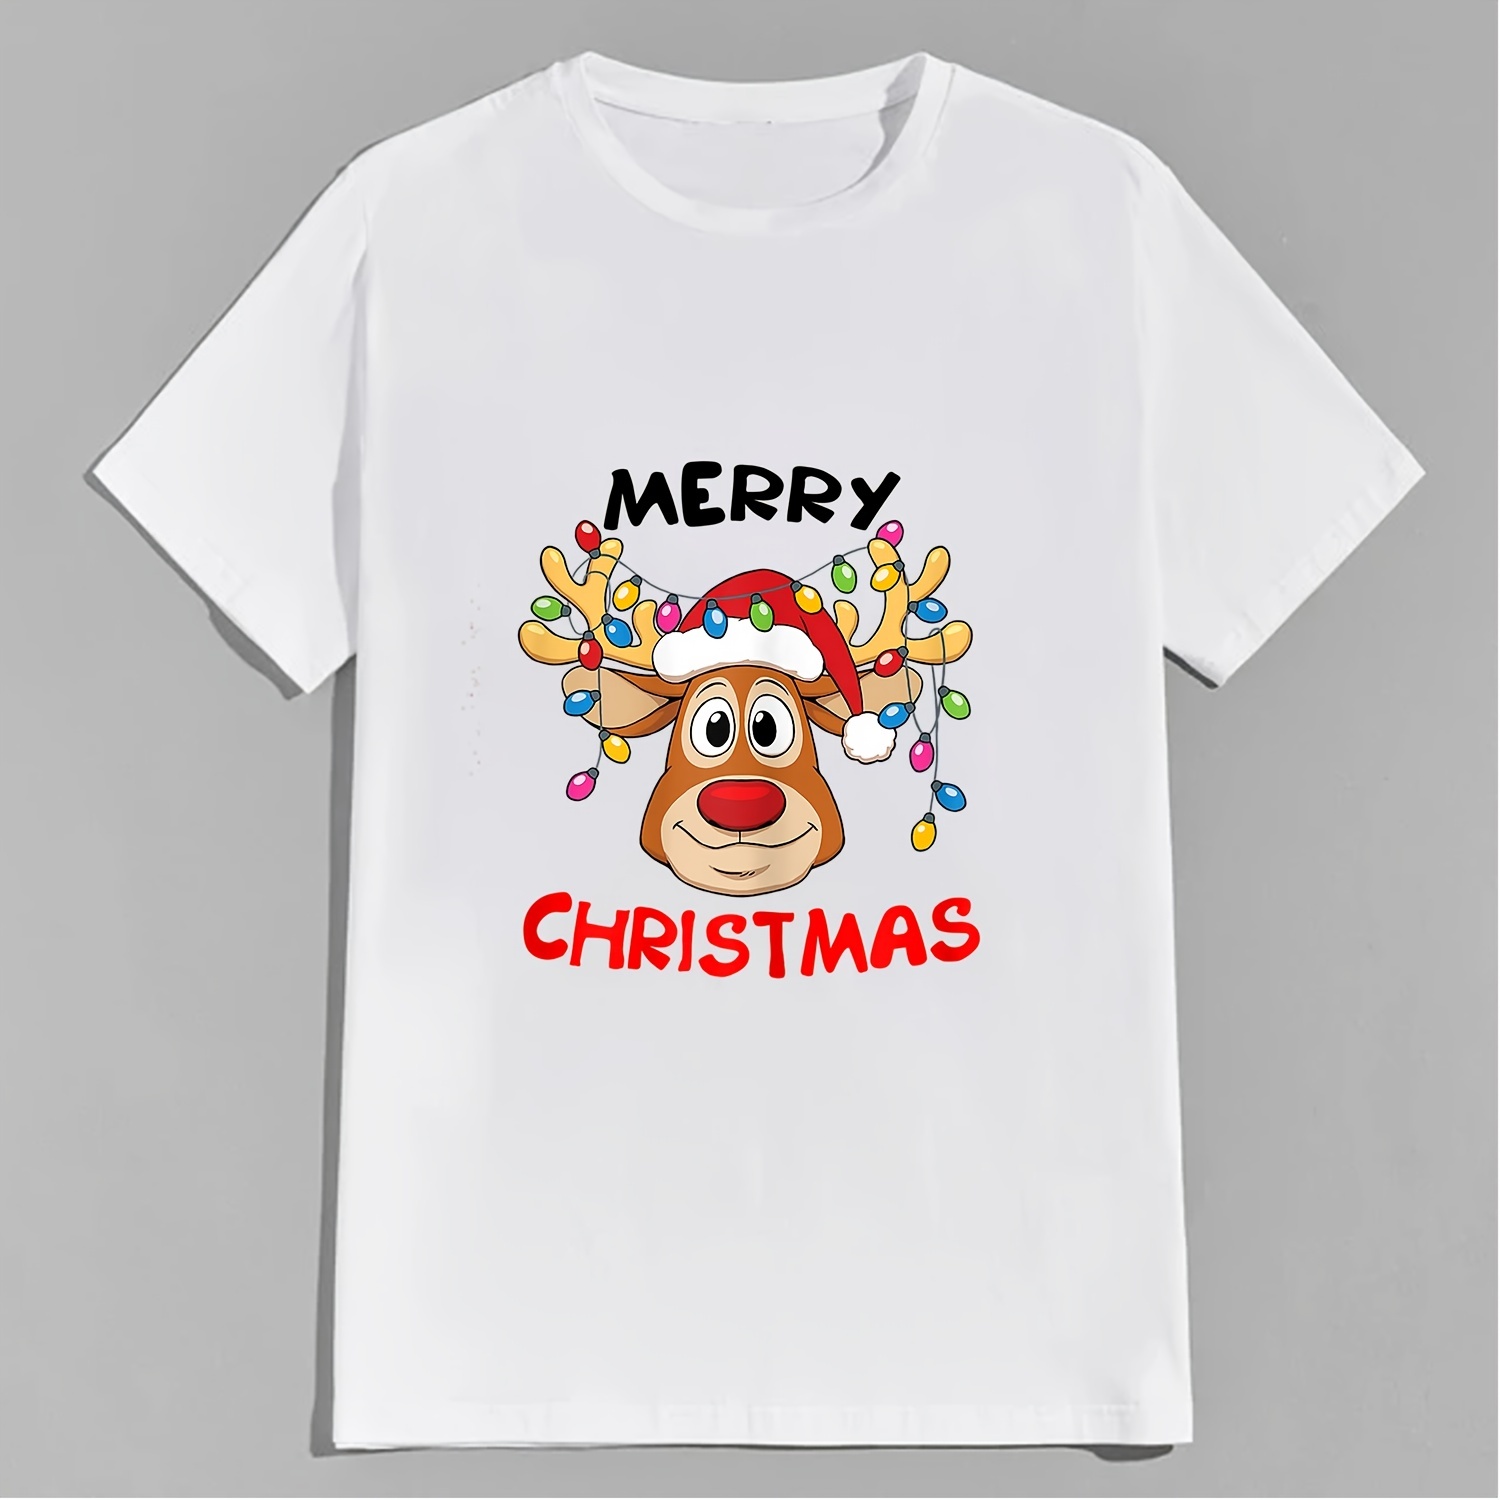 Christmas Iron on Transfers for T Shirts, Christmas Iron on Patches Iron on  Christmas Appliques Heat Transfer Stickers Cute Cartoon Pattern Funny Dog